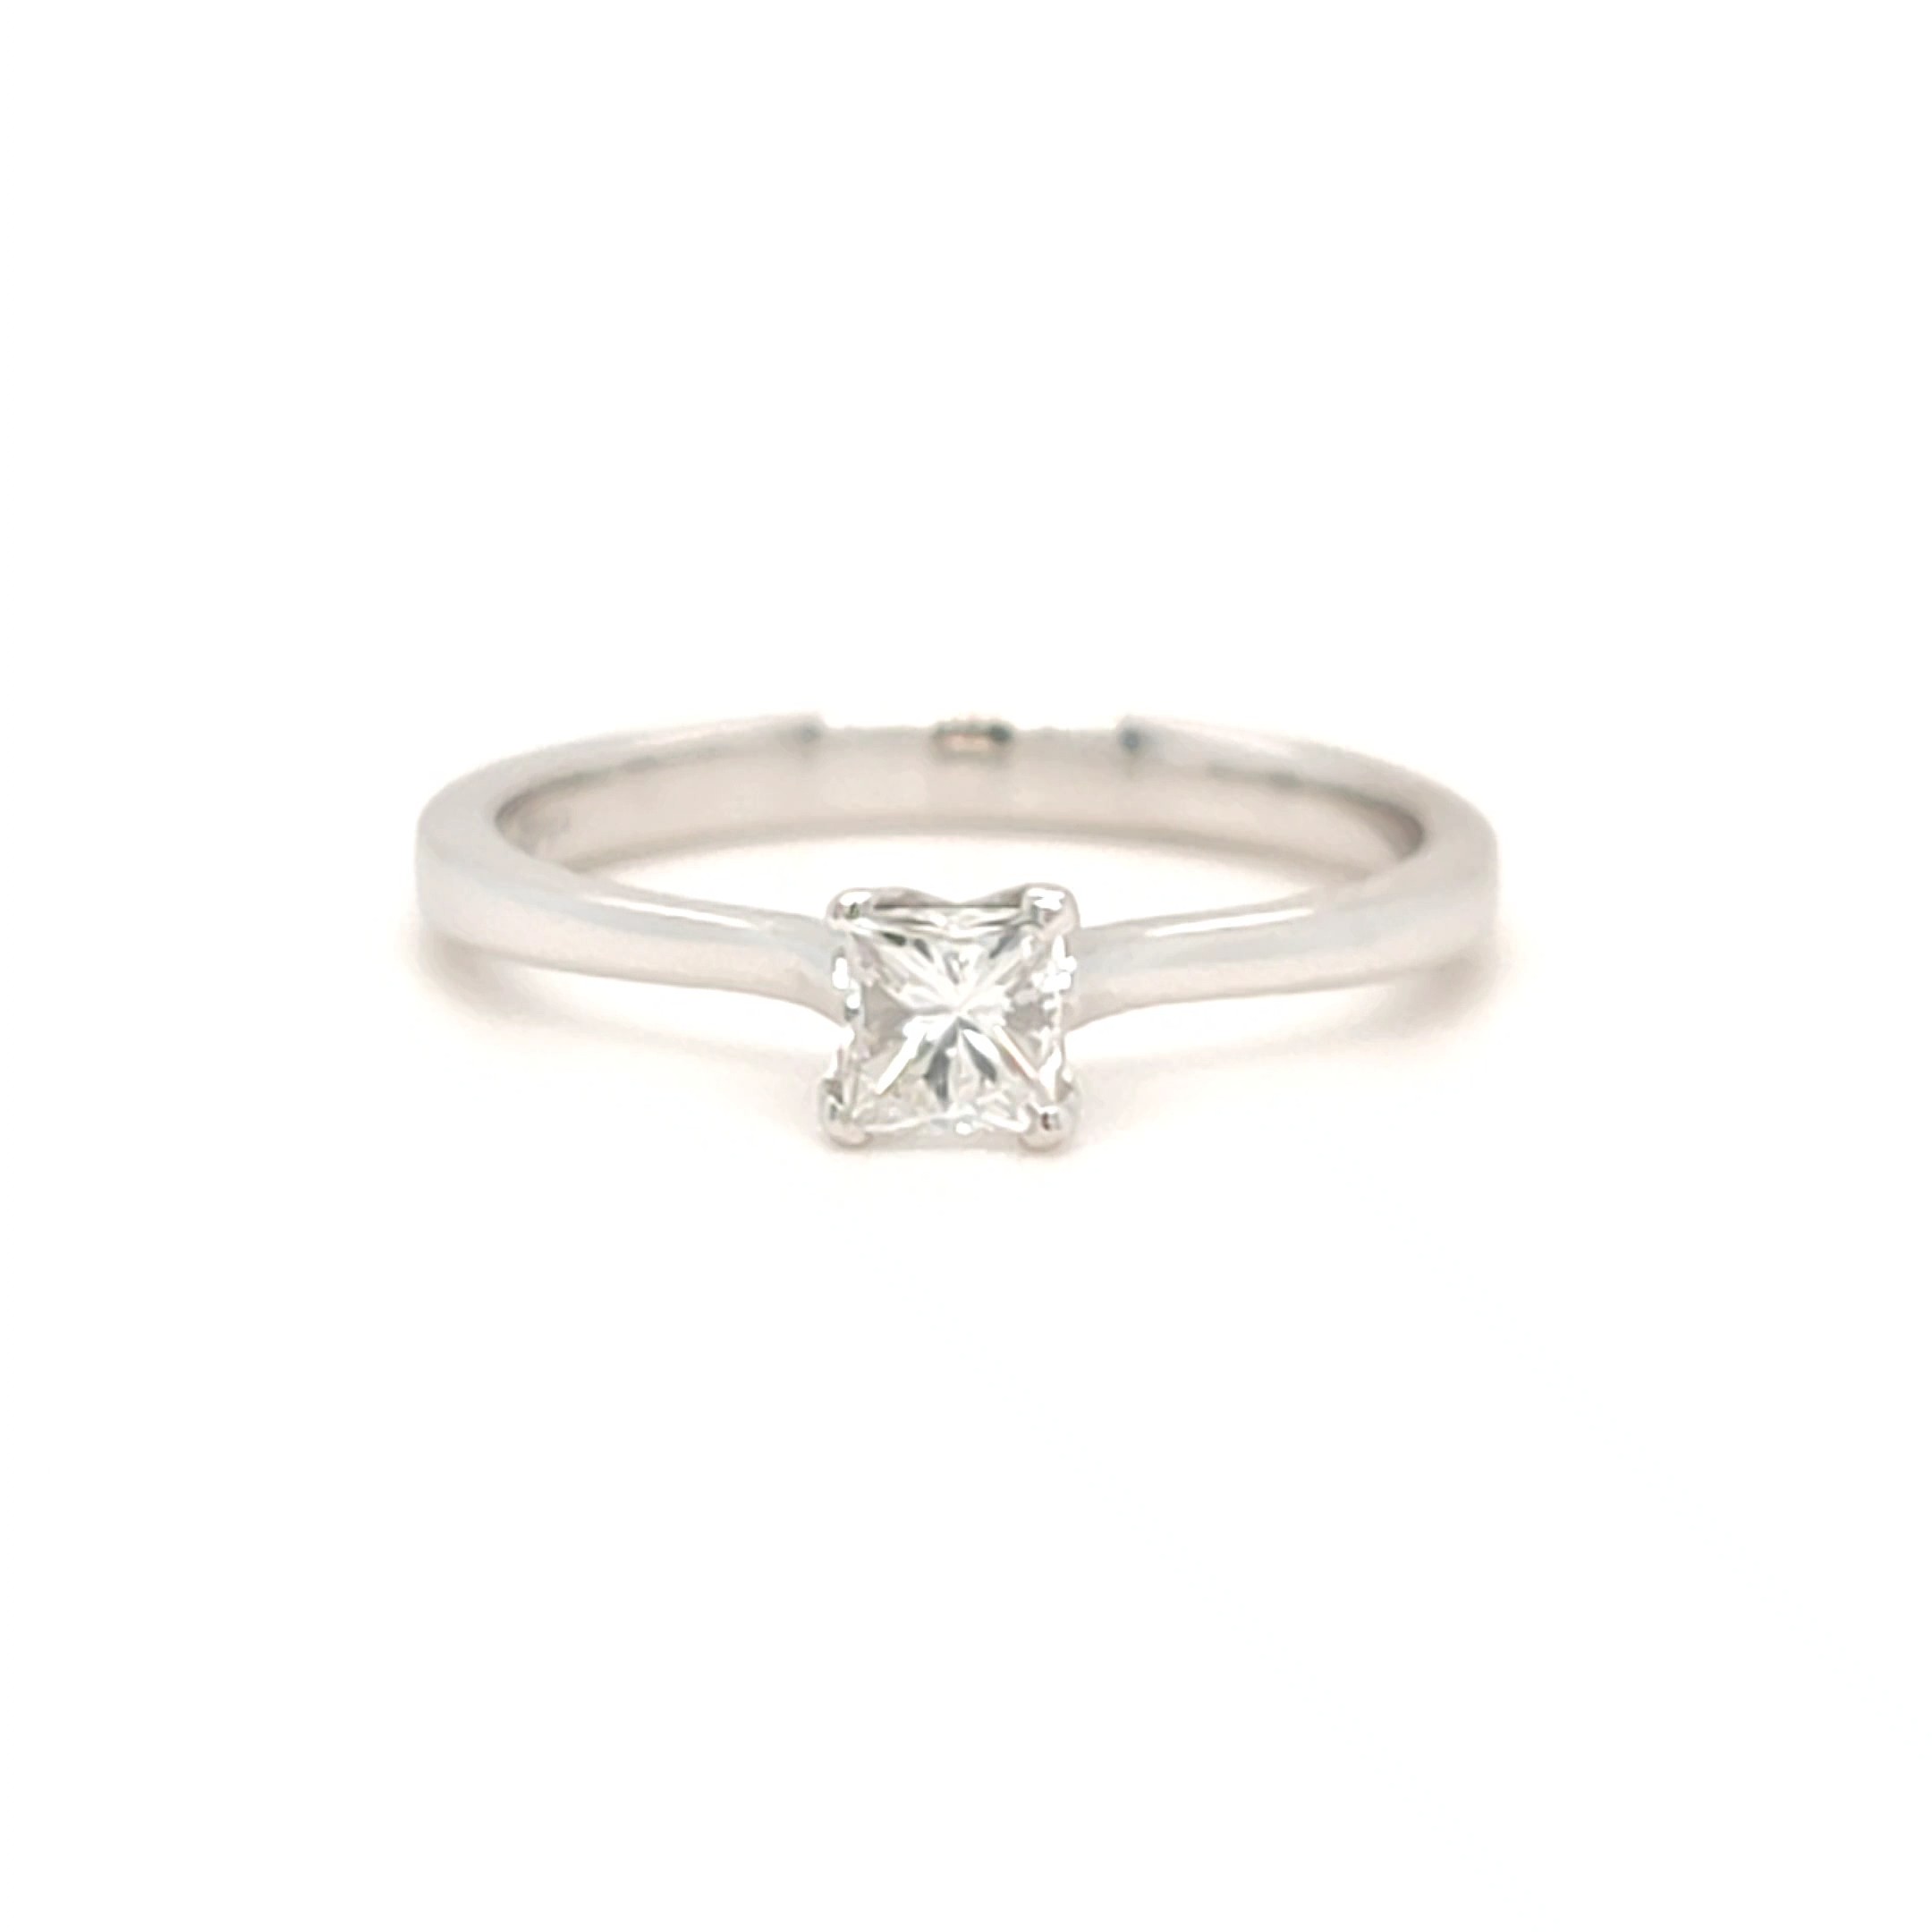 0.37ct, 18ct White Gold Princess Cut Diamond Solitaire Ring